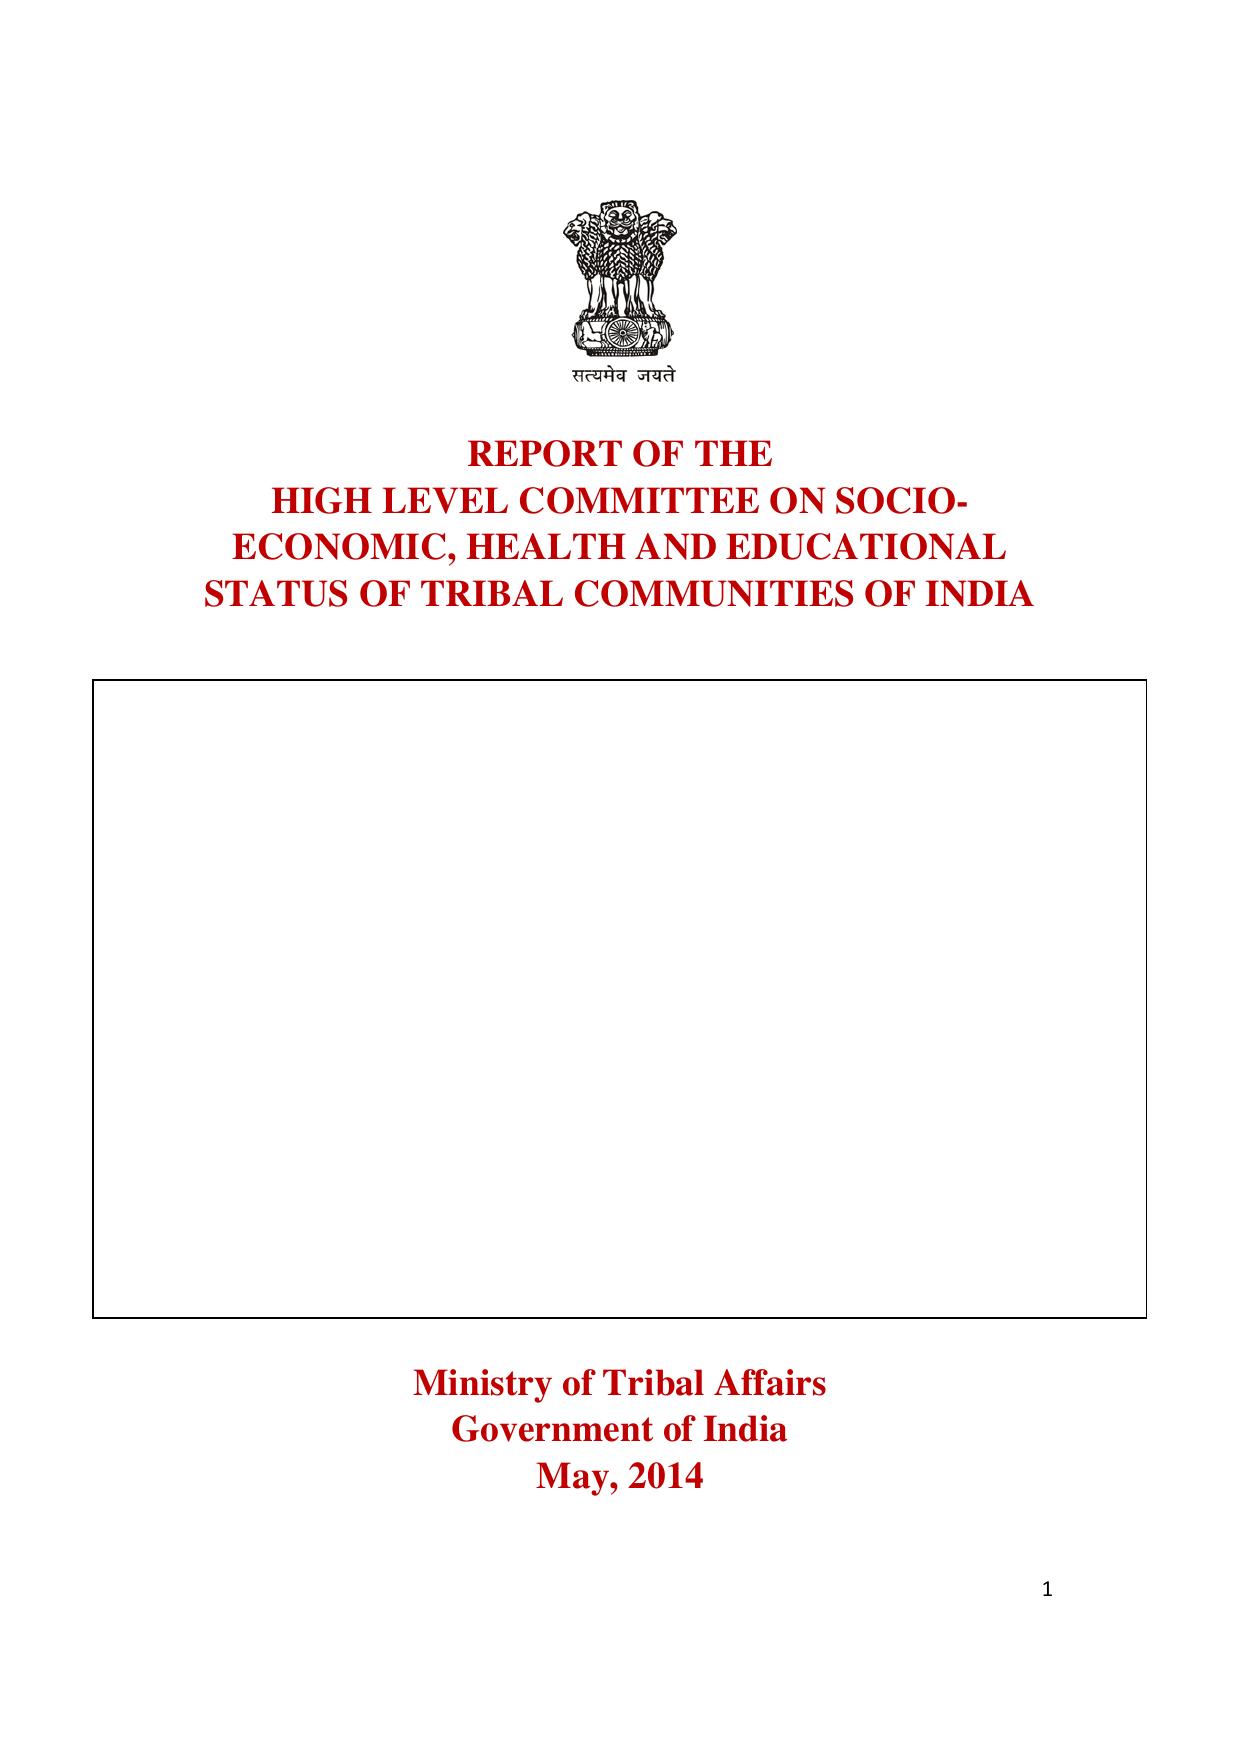 ECONOMIC, HEALTH AND EDUCATIONAL STATUS OF TRIBAL COMMUNITIES OF INDIA 2014